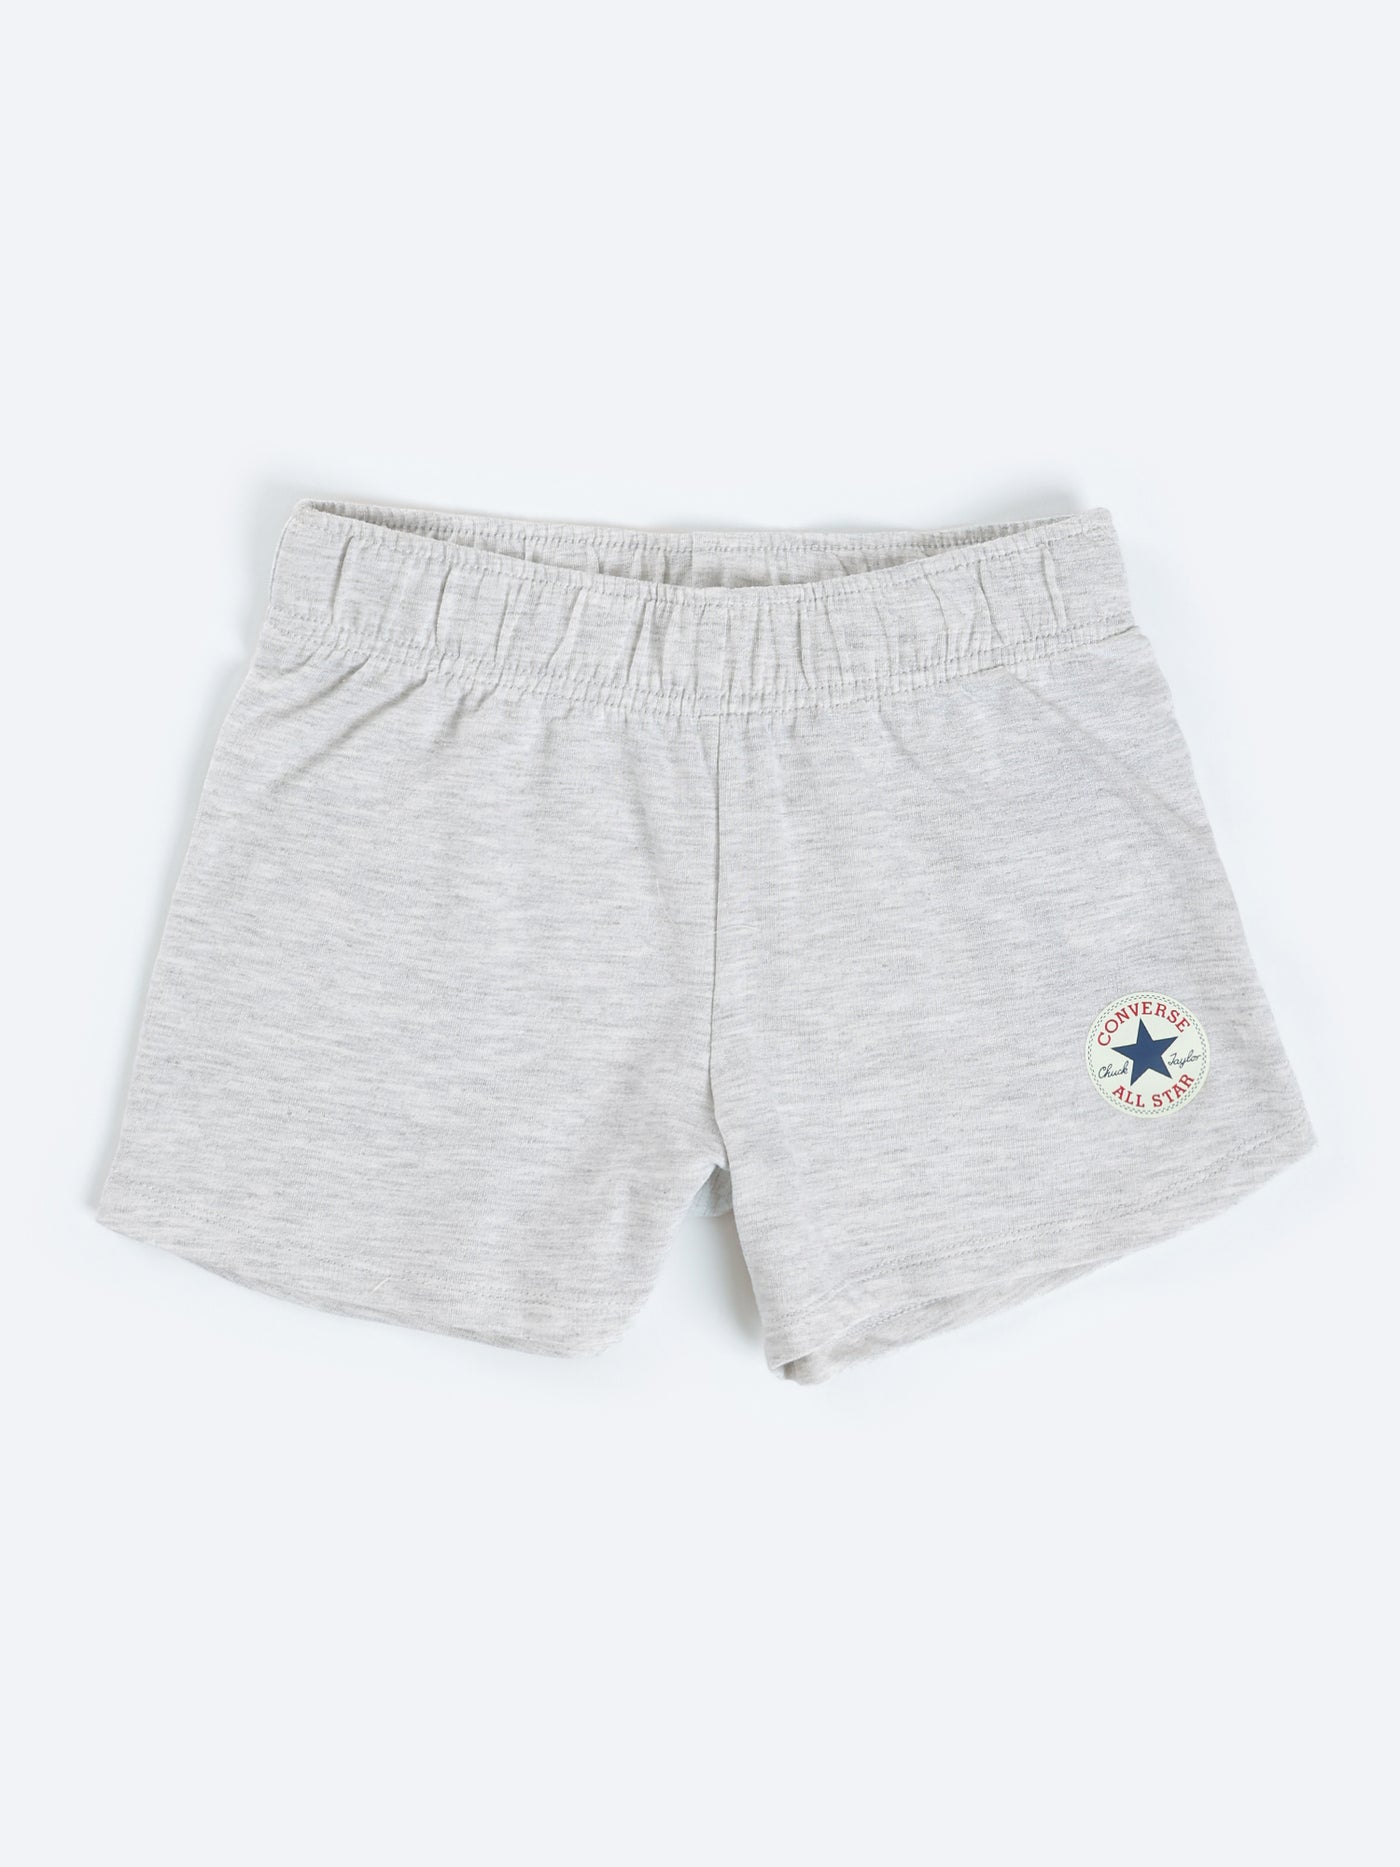 Converse Kids Girls Shorts with Printed Logo and Elasticated Waist